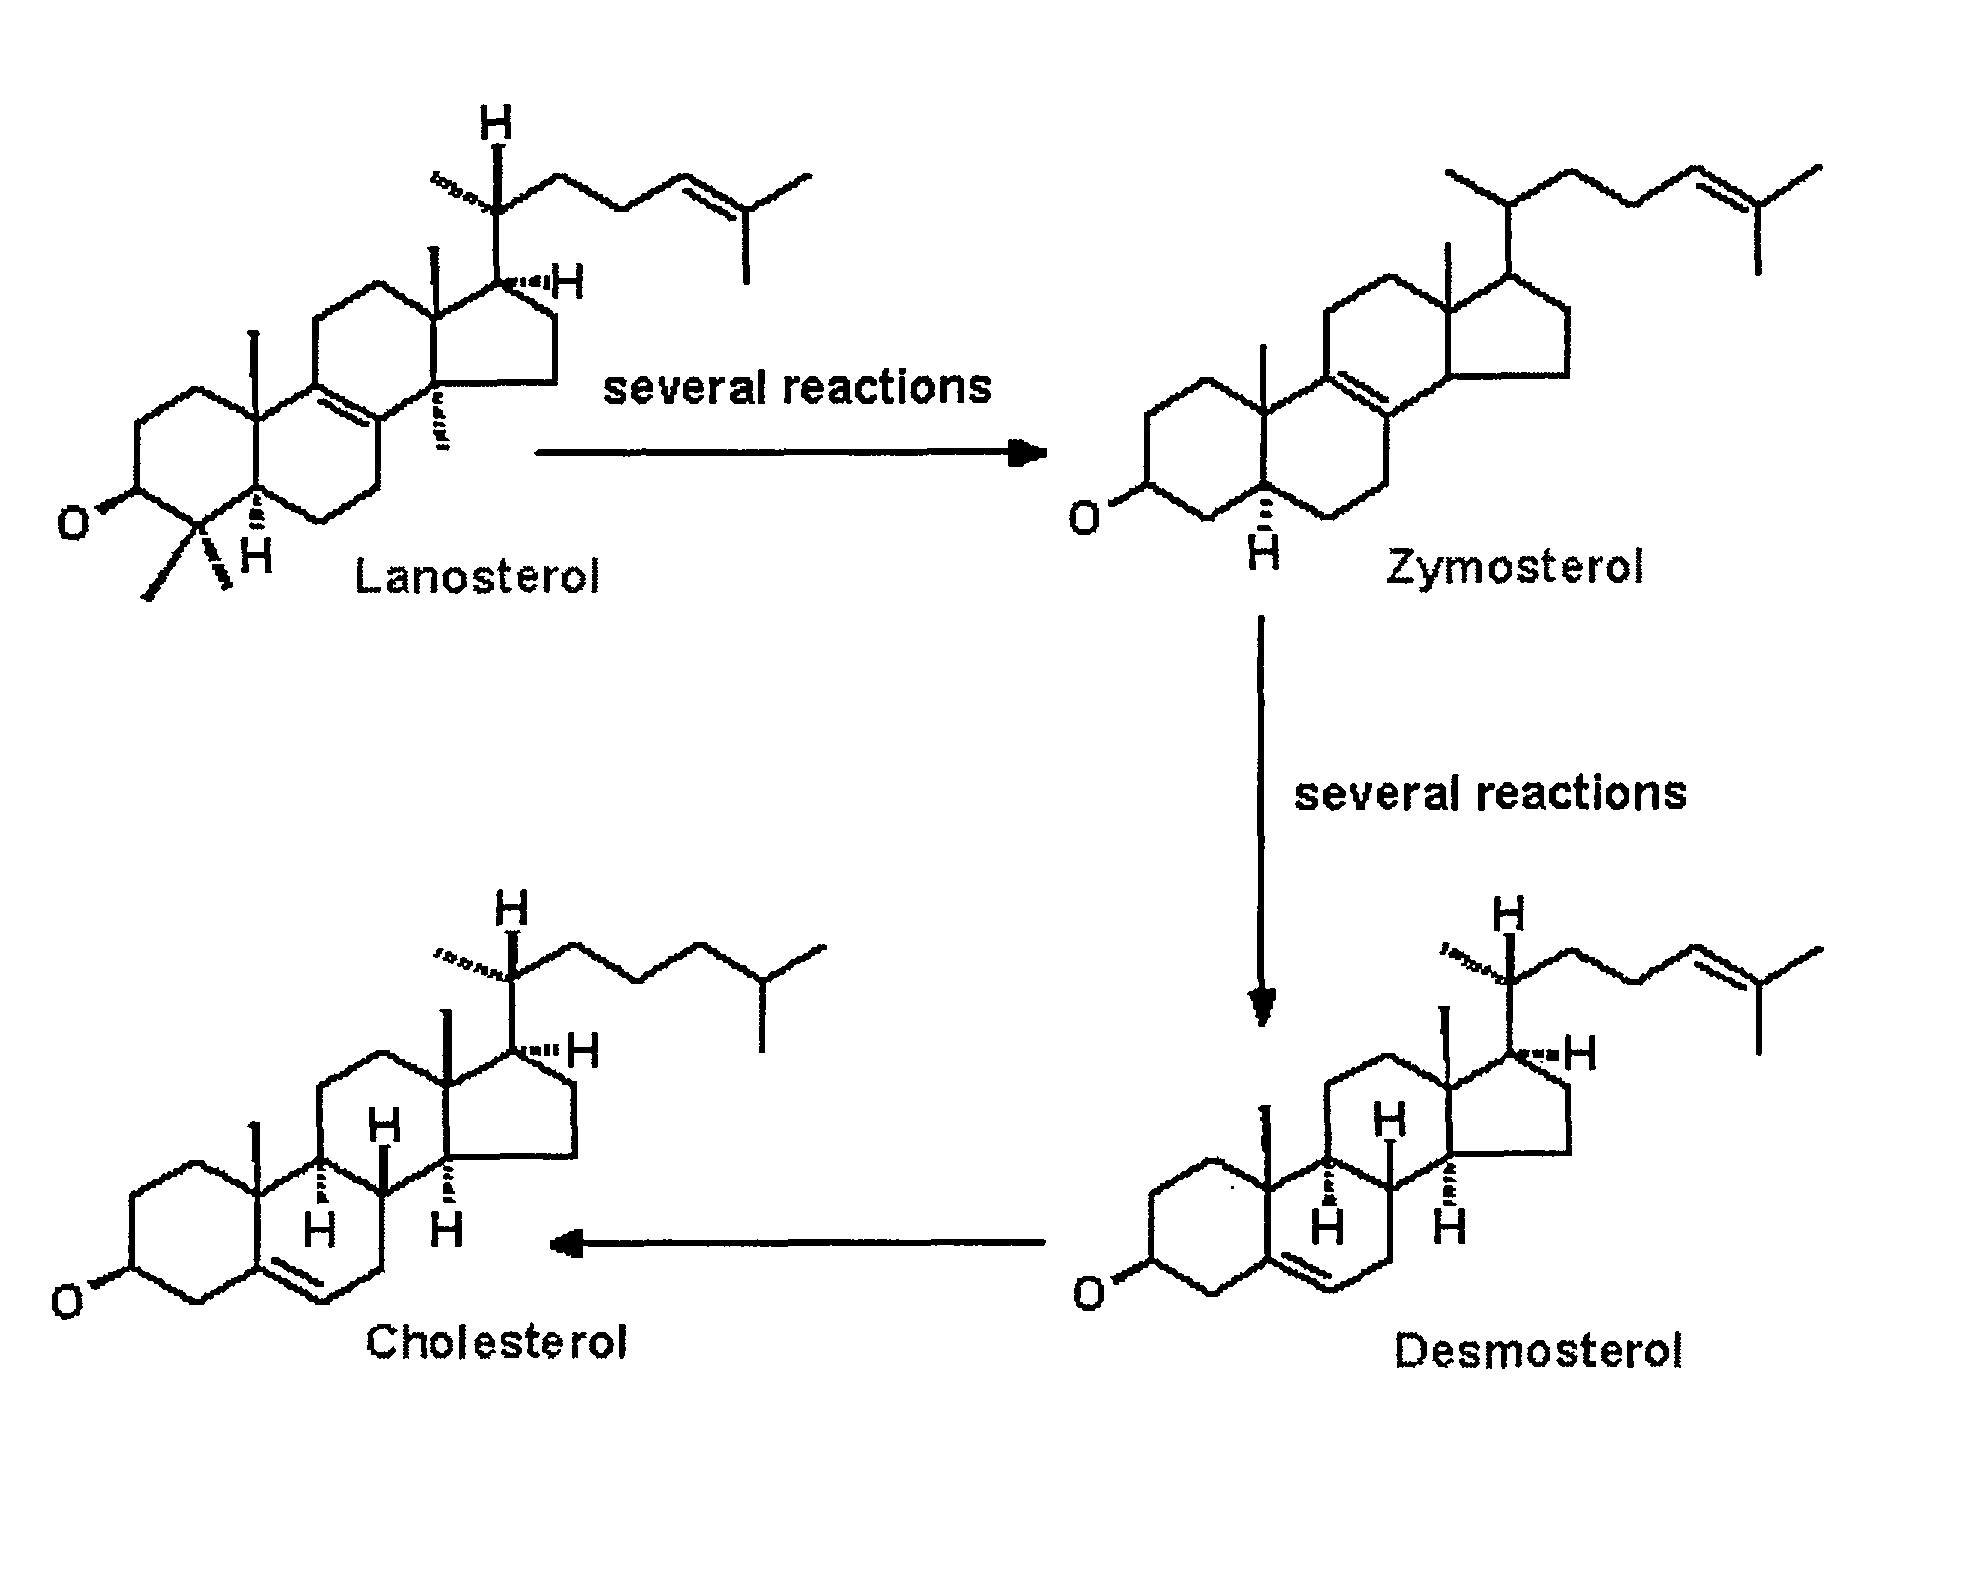 Class of sterol ligands and their uses in regulation of cholesterol and gene expression